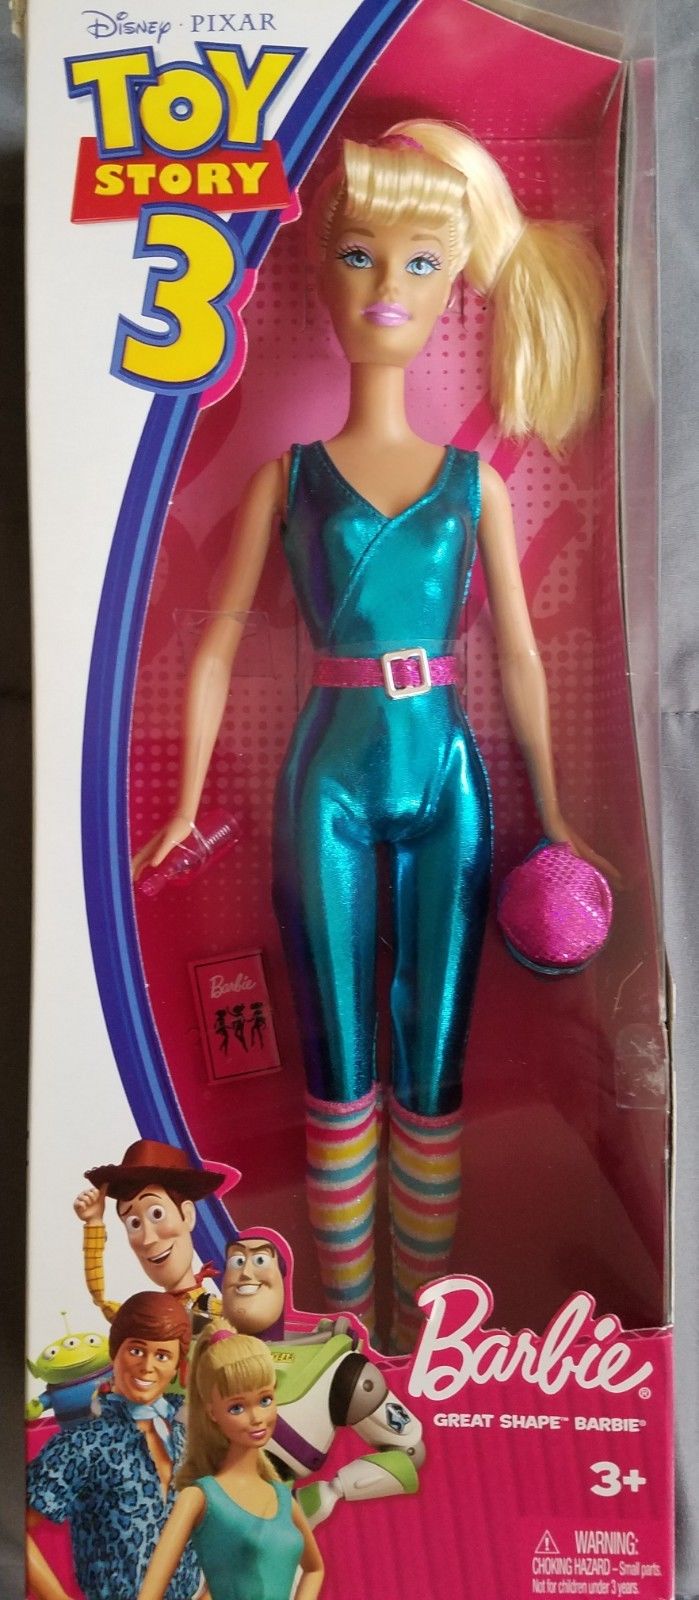 Toy Story 3 Great Shape Barbie